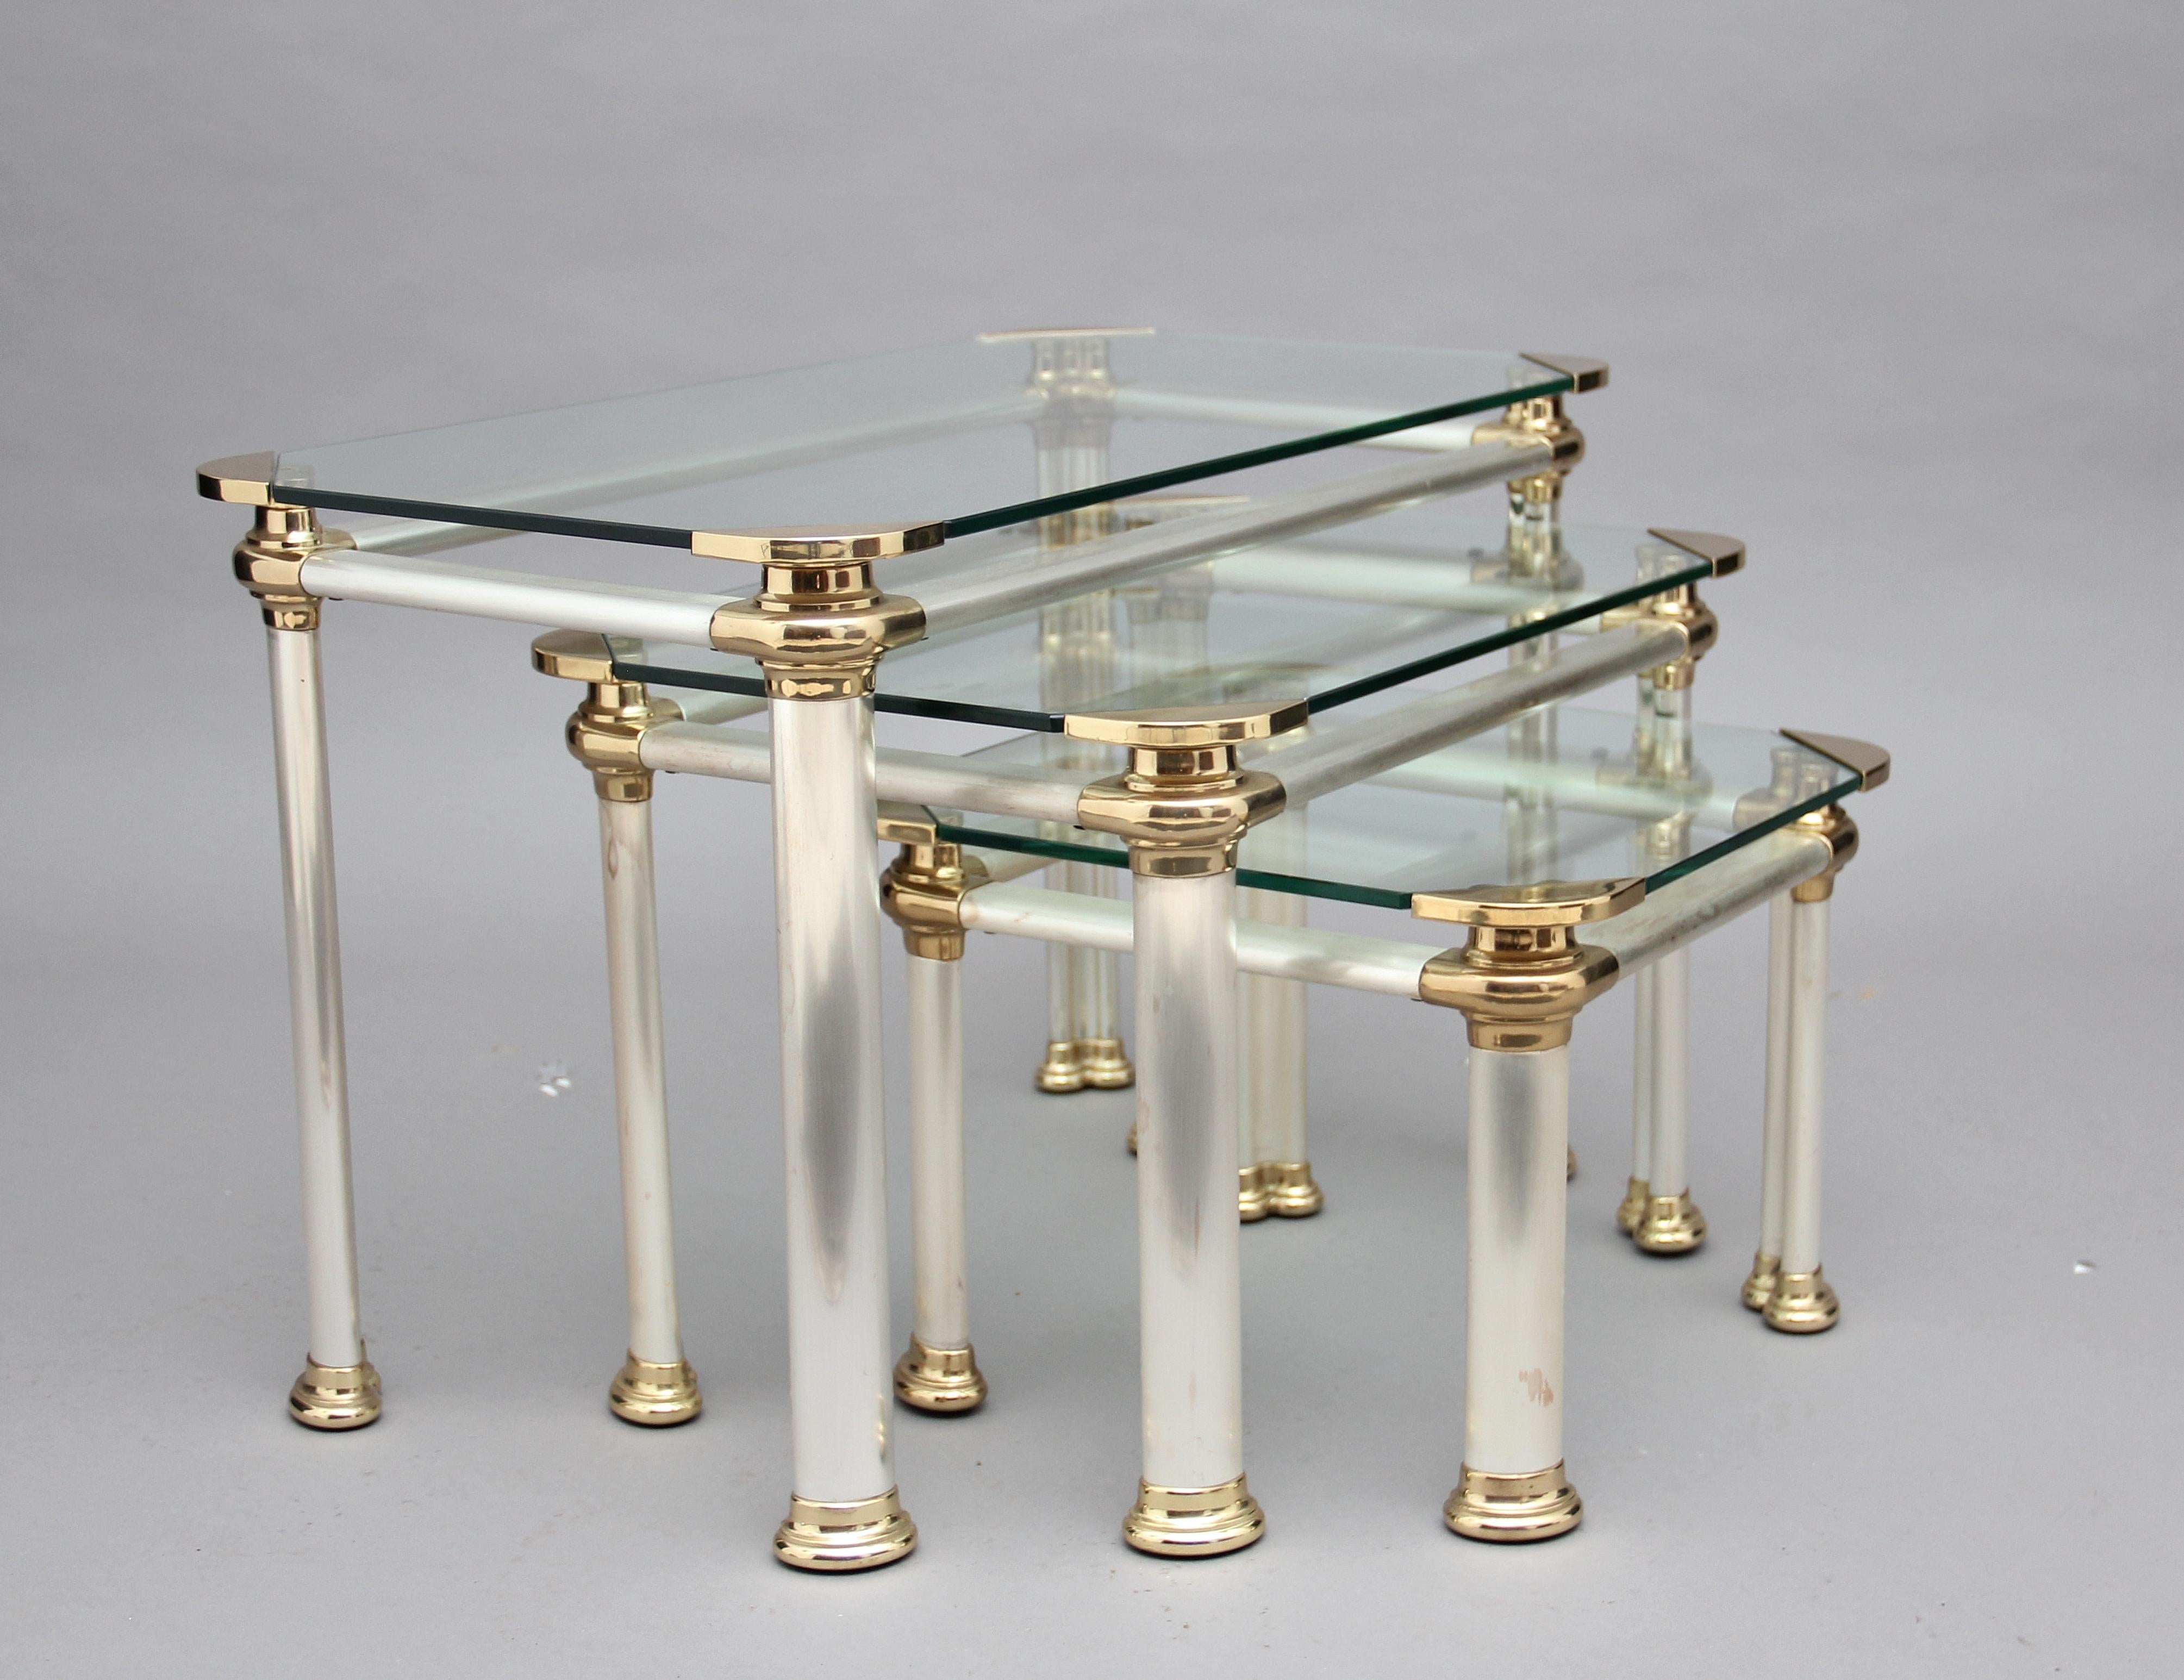 A nest of three mid-20th century Italian brushed steel, brass and glass occasional tables, having a glass top with decorative brass corners, a brushed steel frame and oval legs ending on brass caps. Lovely quality and in excellent condition, circa